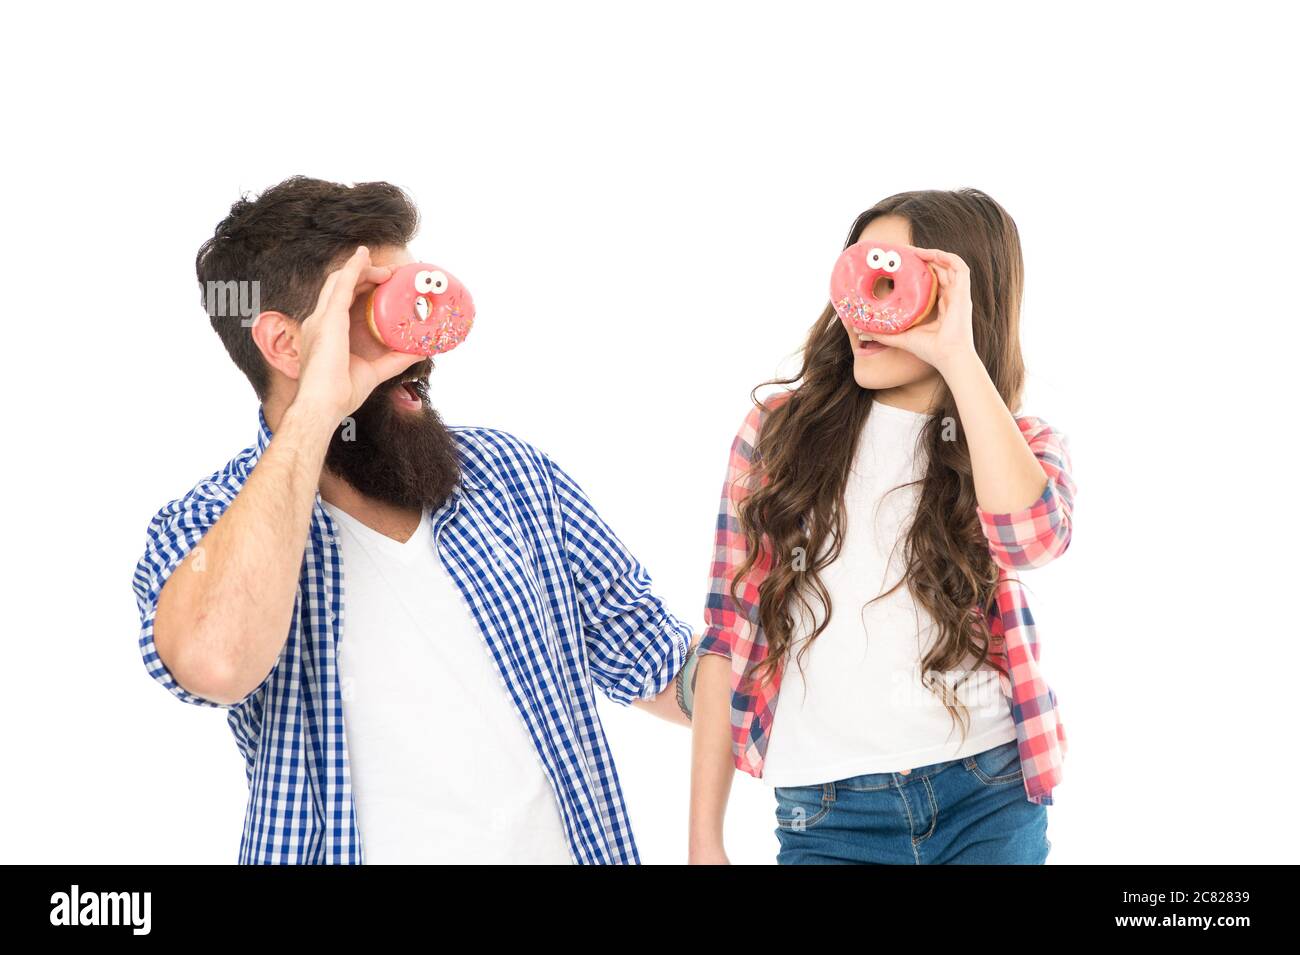 Cheerful family. Sweets and treats concept. Daughter and father eat sweet donuts. Dessert. Happiness and joy. Sweet mood. Bakery shop. Fathers day. Sweet tooth. Girl child and dad hold glazed donuts. Stock Photo